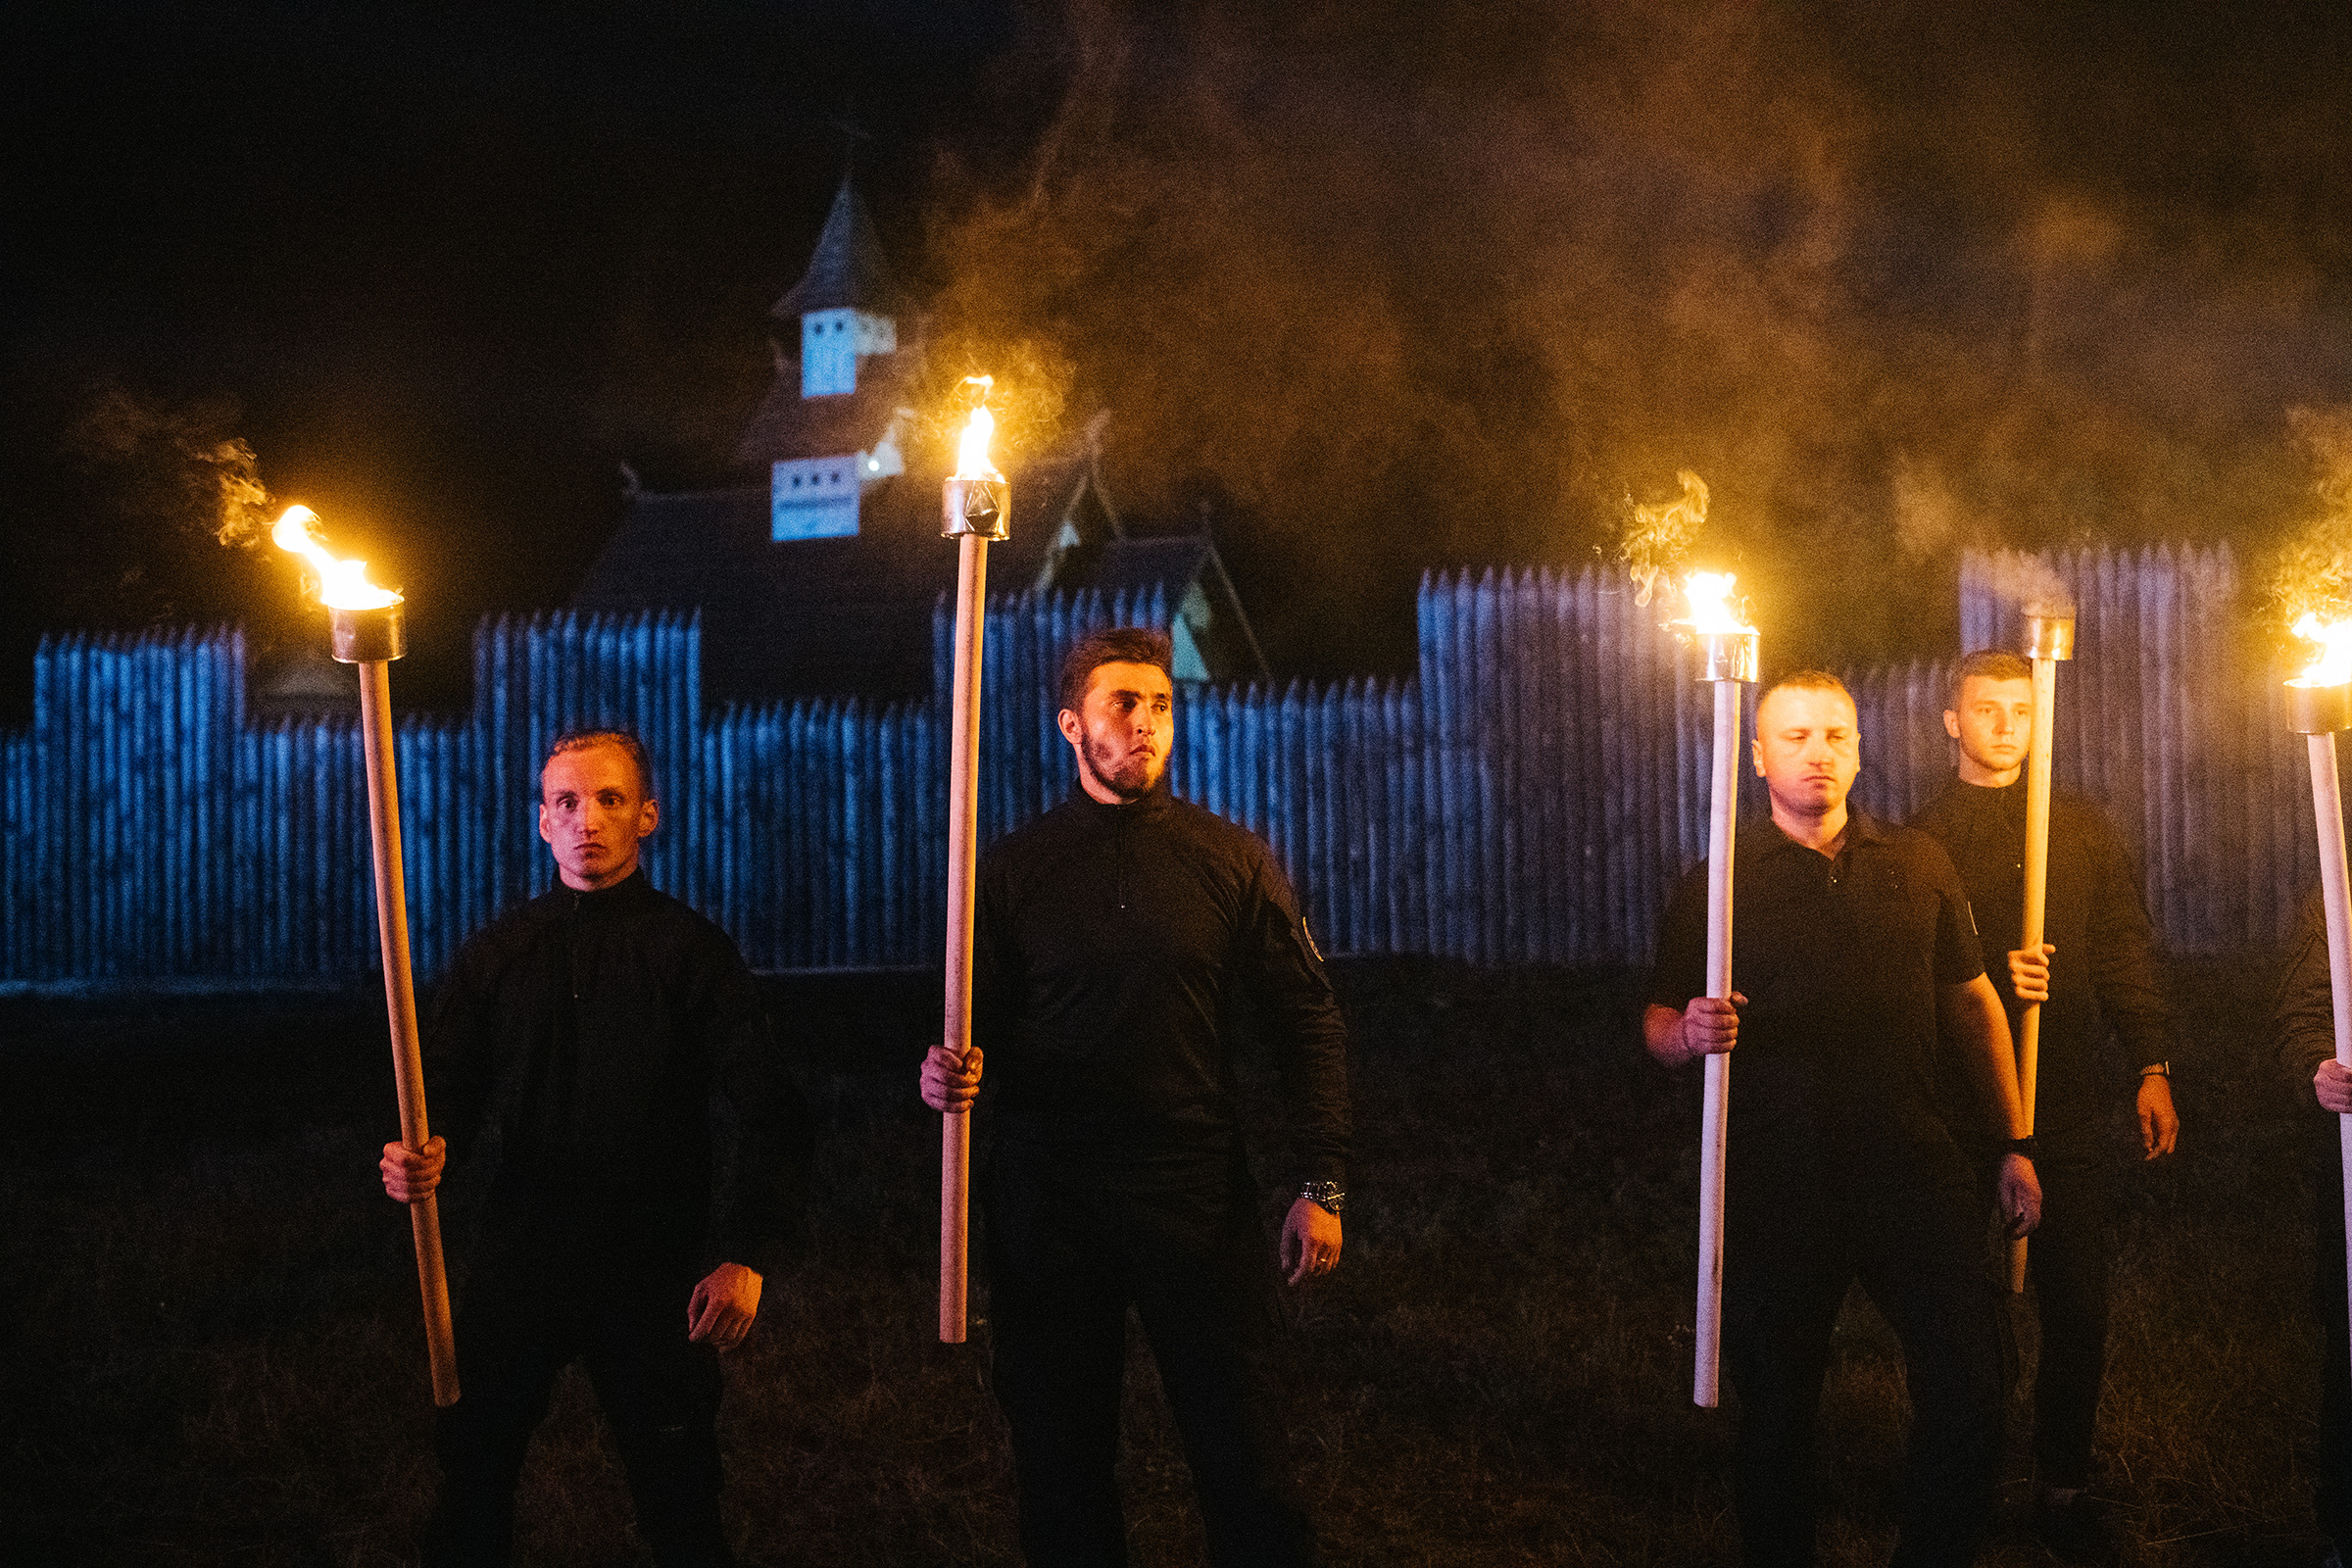 Azov members preparing to take part in a torchlit march at the Young Flame festival. (Maxim Dondyuk for TIME)